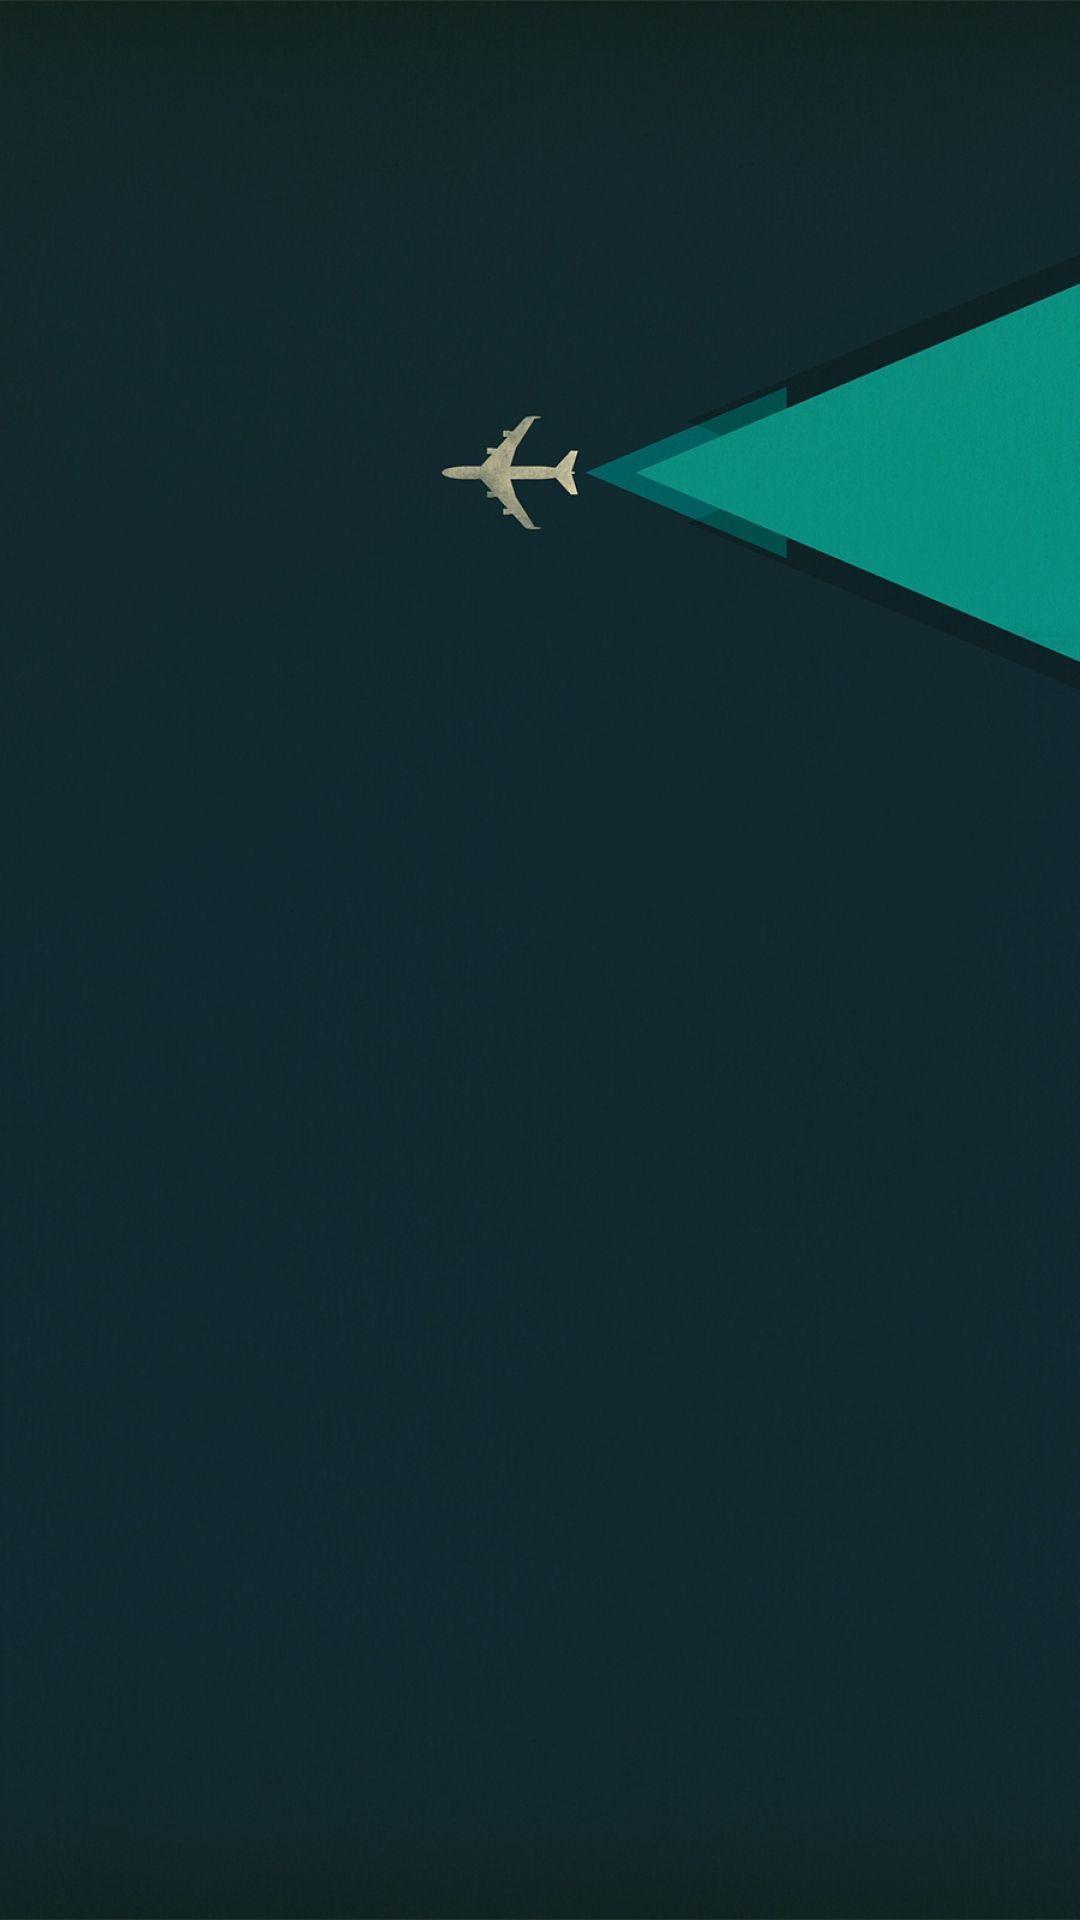 Plane. Tap to see more nice Minimalist iPhone Wallpaper. mobile9 #minimal #minimalistic. Minimal wallpaper